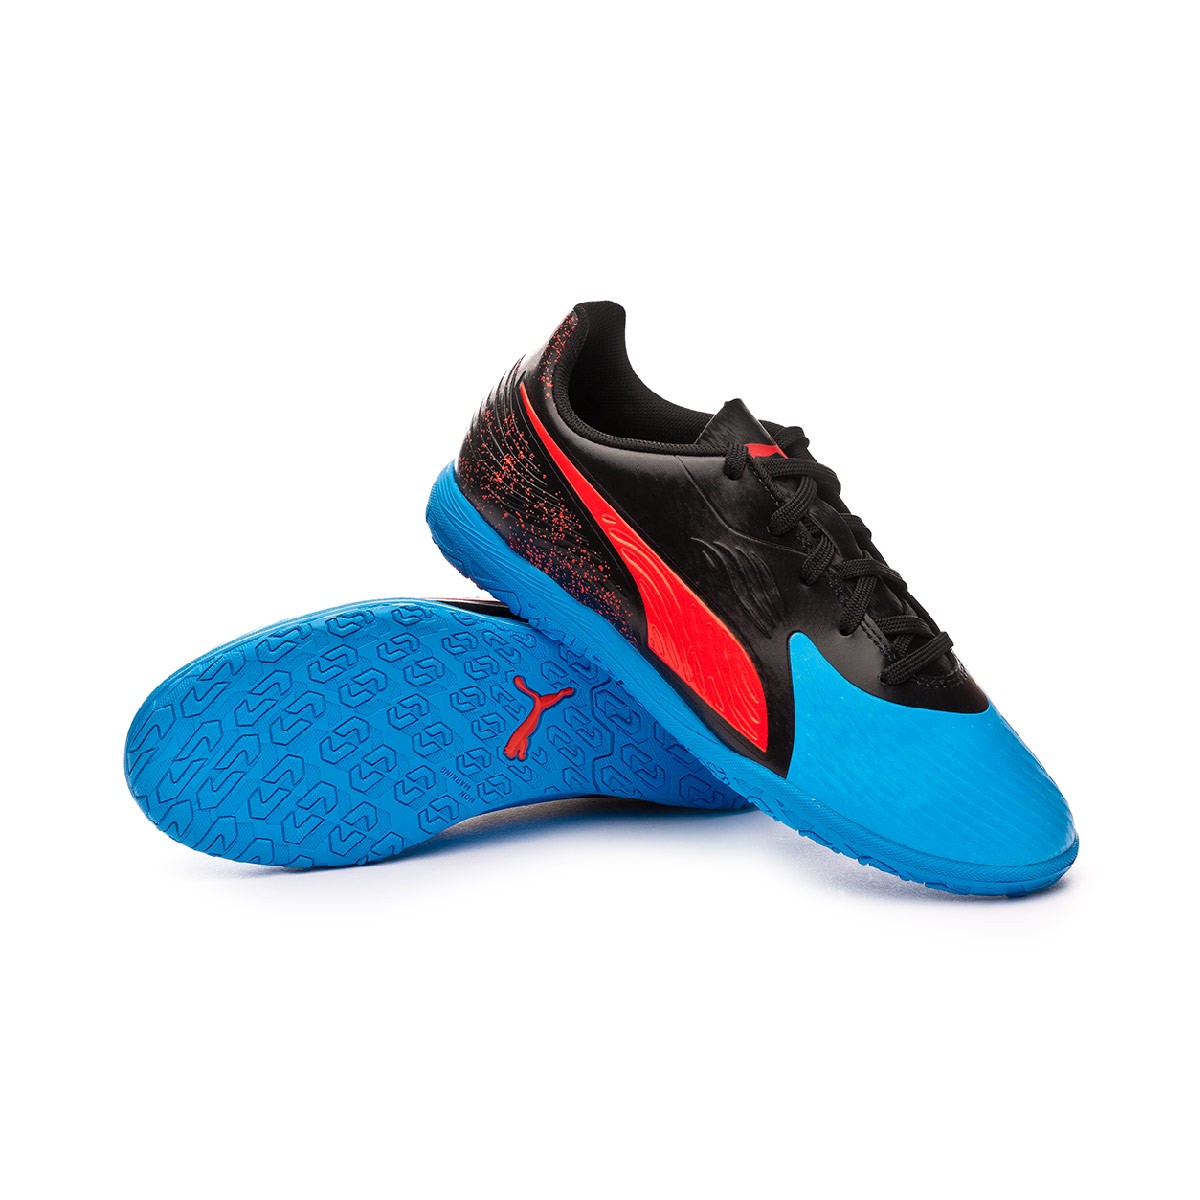 puma youth indoor soccer shoes